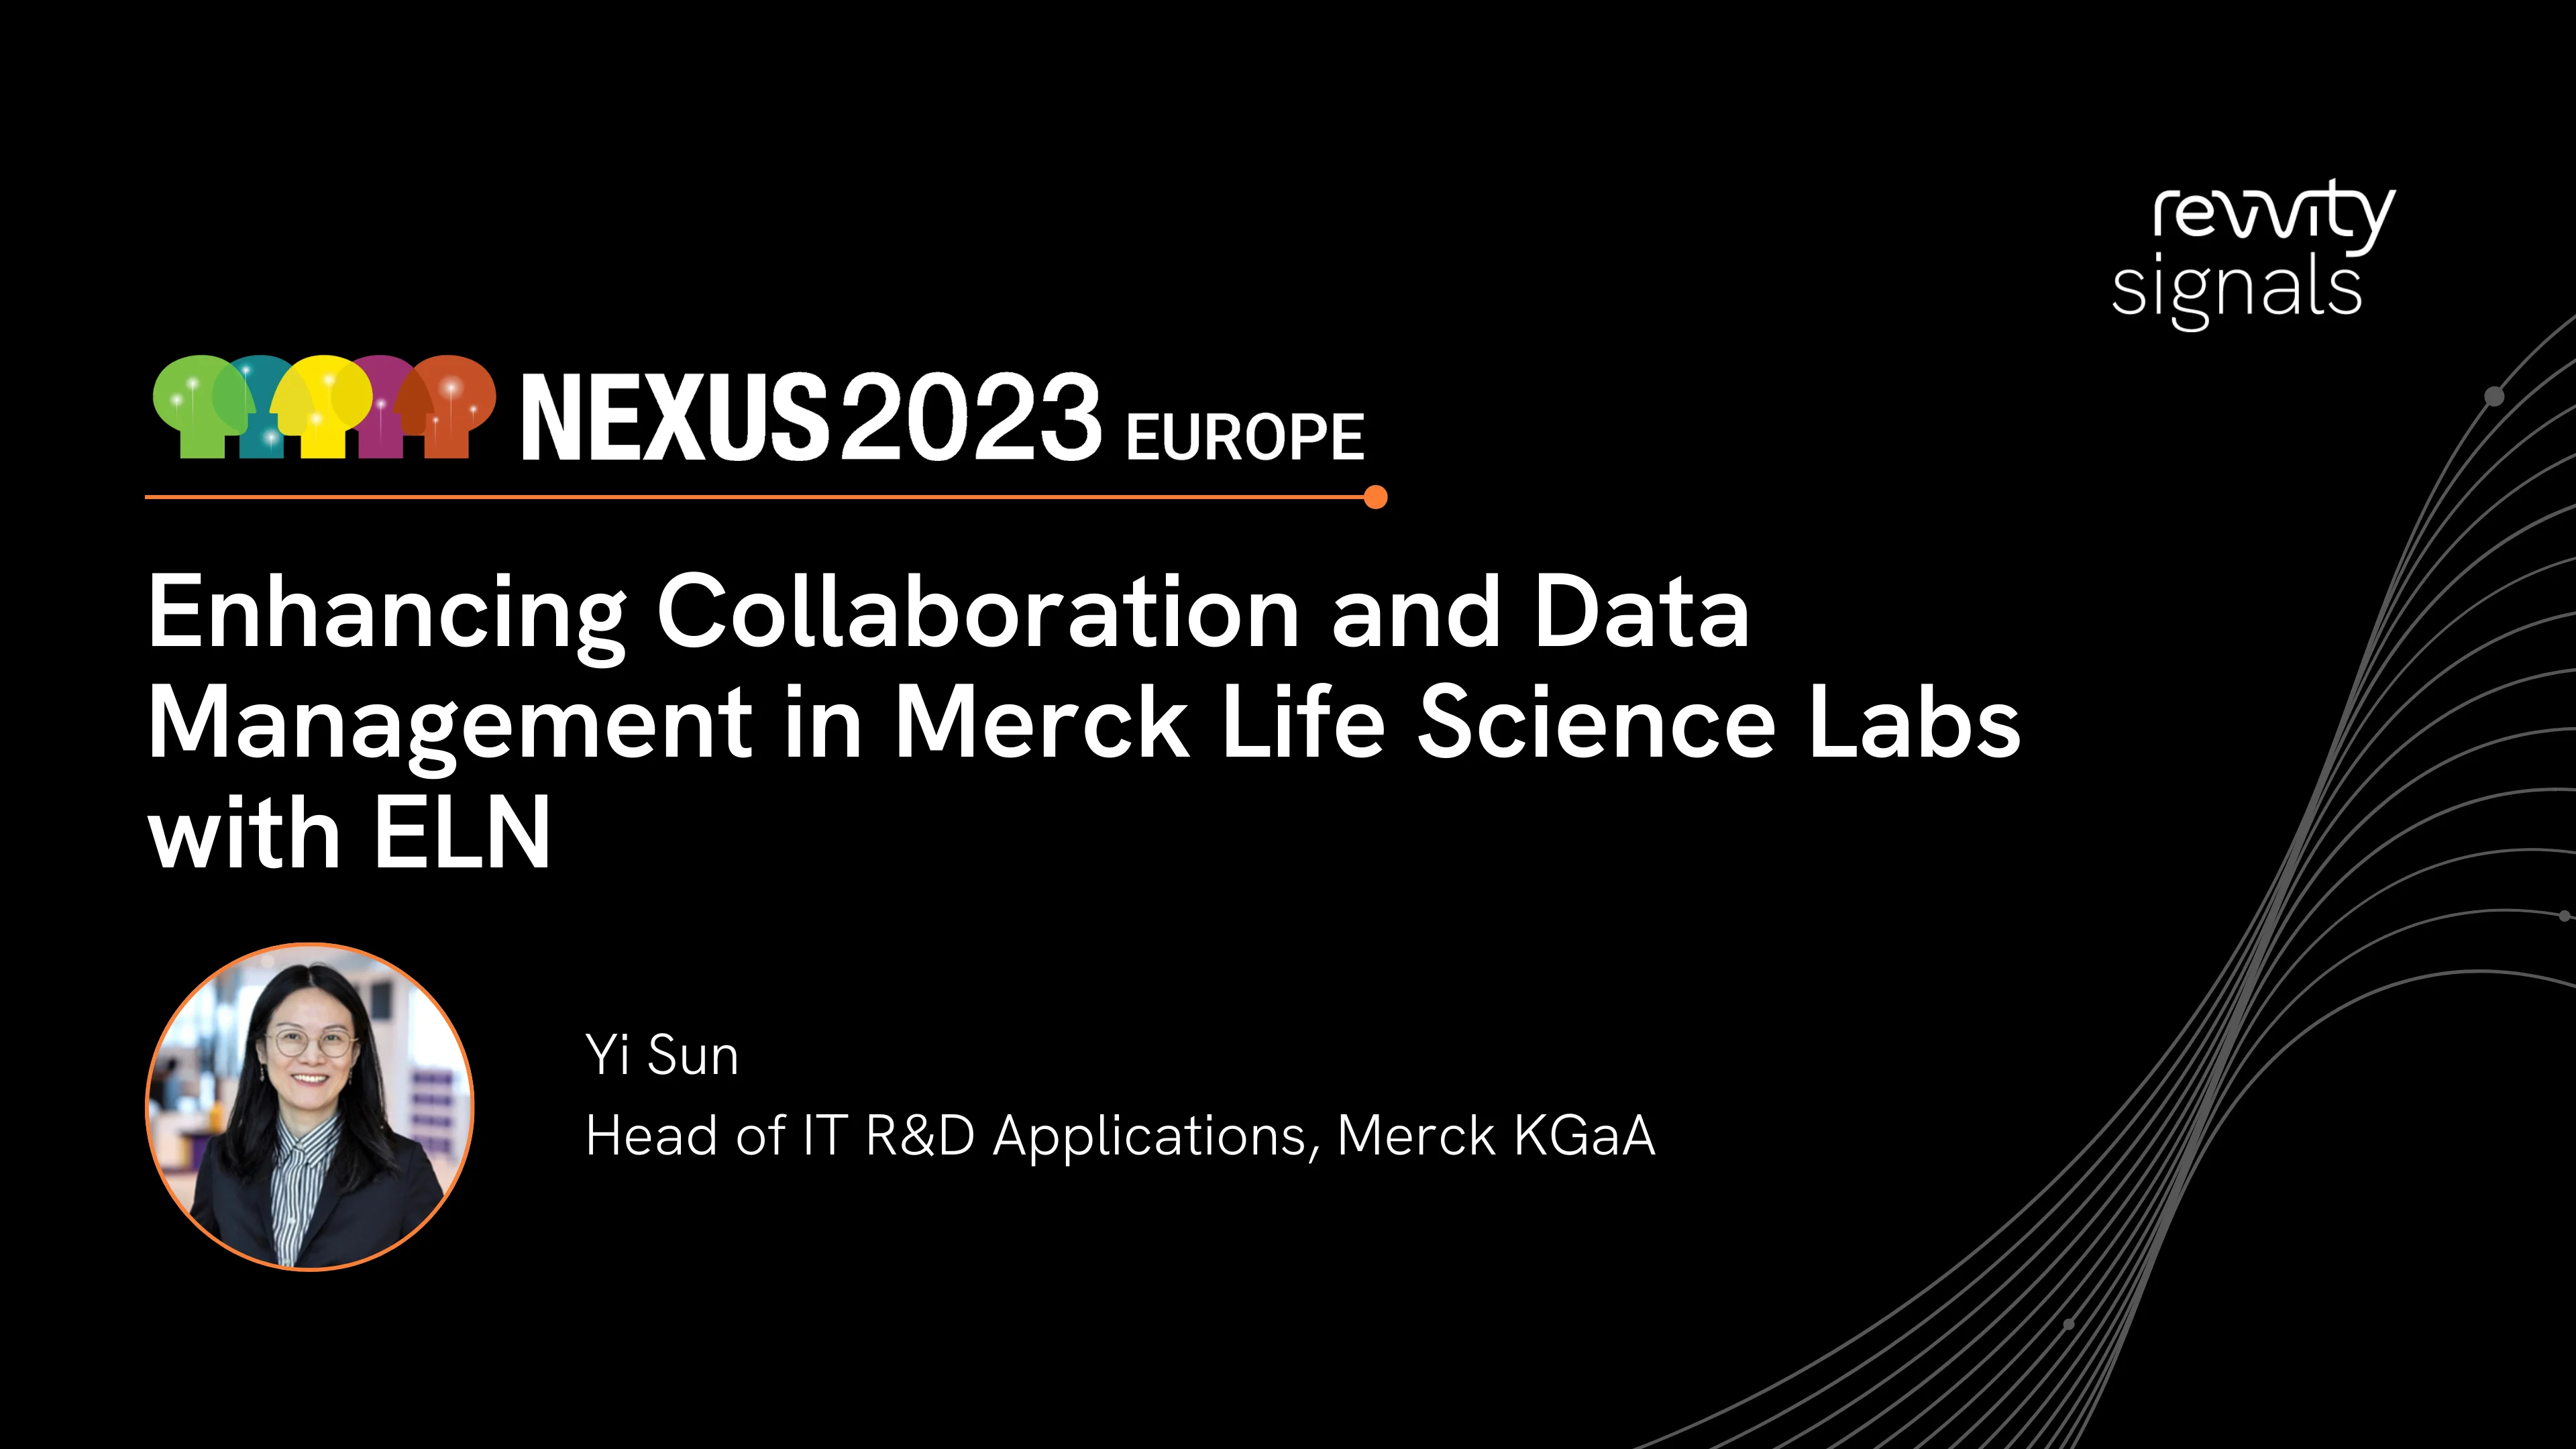 Watch Day 2, EU NEXUS 2023 - Enhancing Collaboration and Data Management in Merck Life Science Labs with ELN on Vimeo.